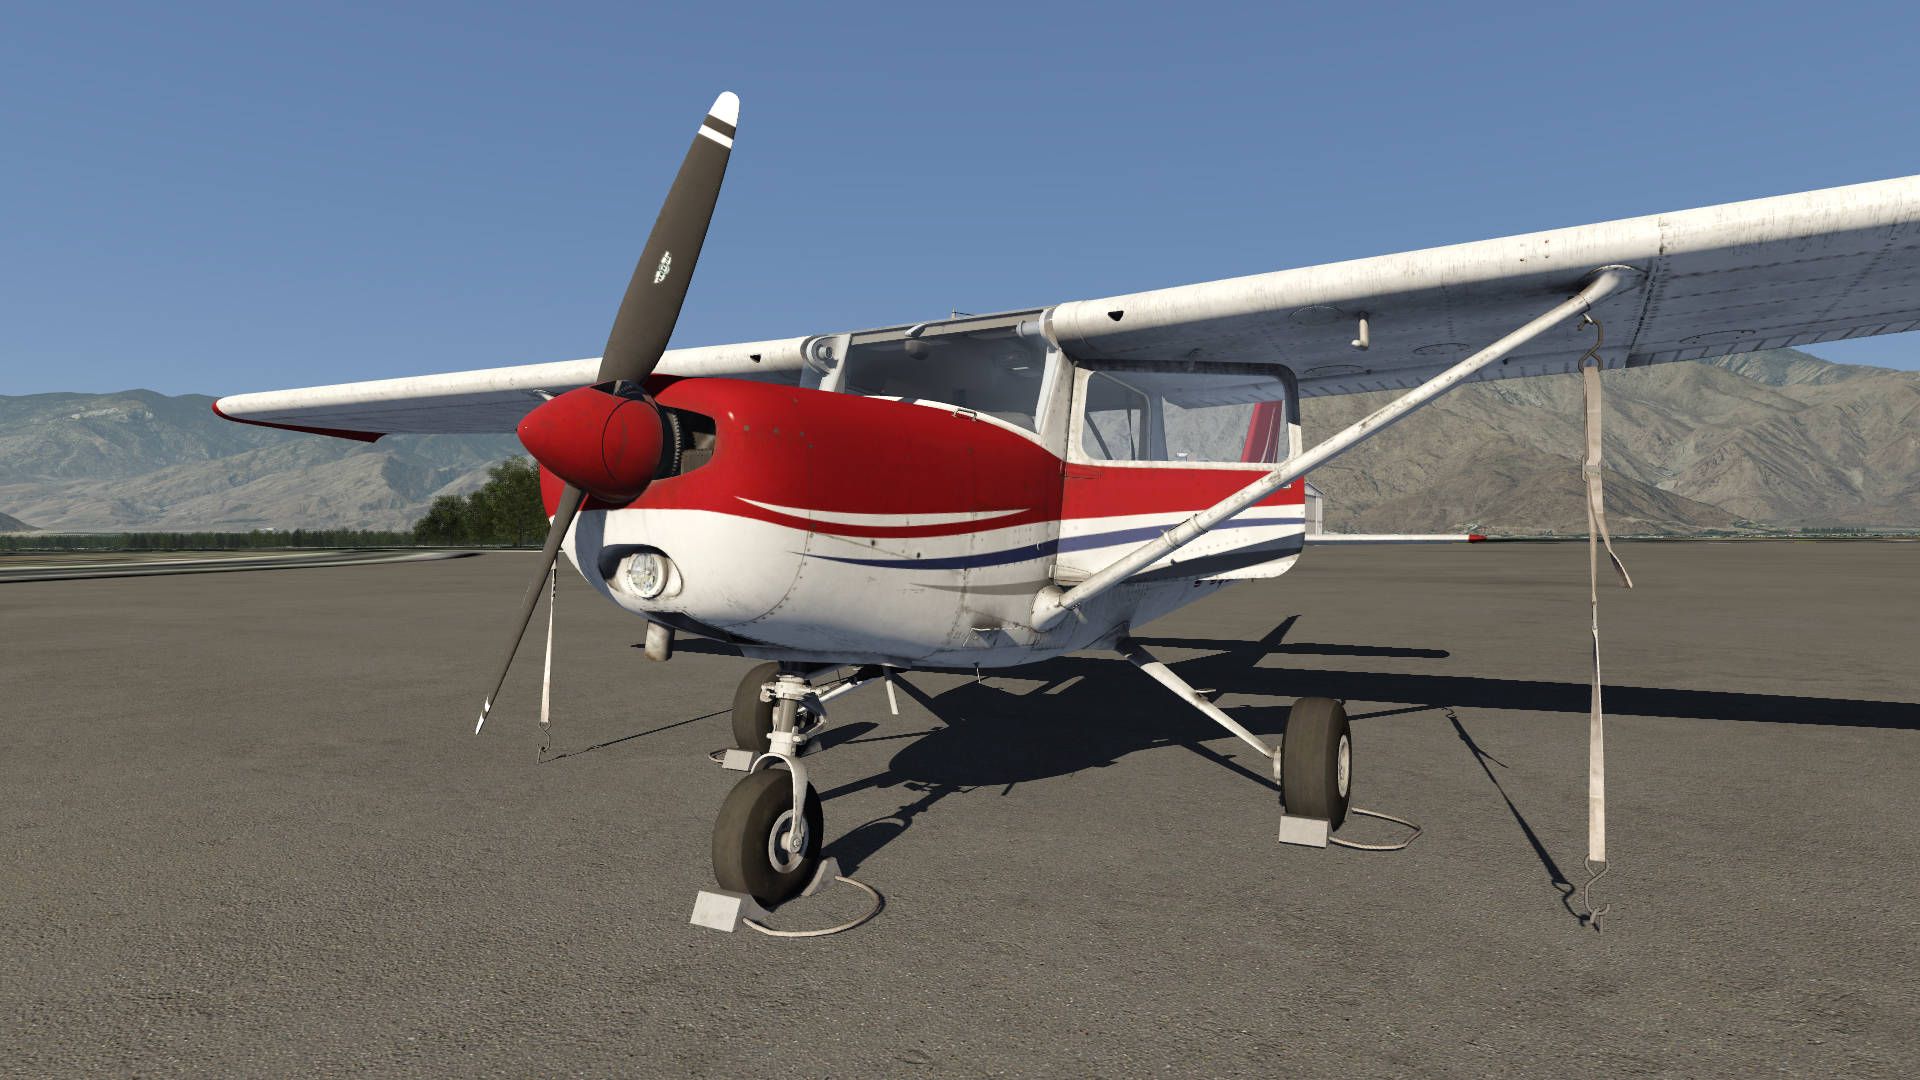 Aerofly FS 2 Flight 152 Available on Steam! discussions Aerofly Forum